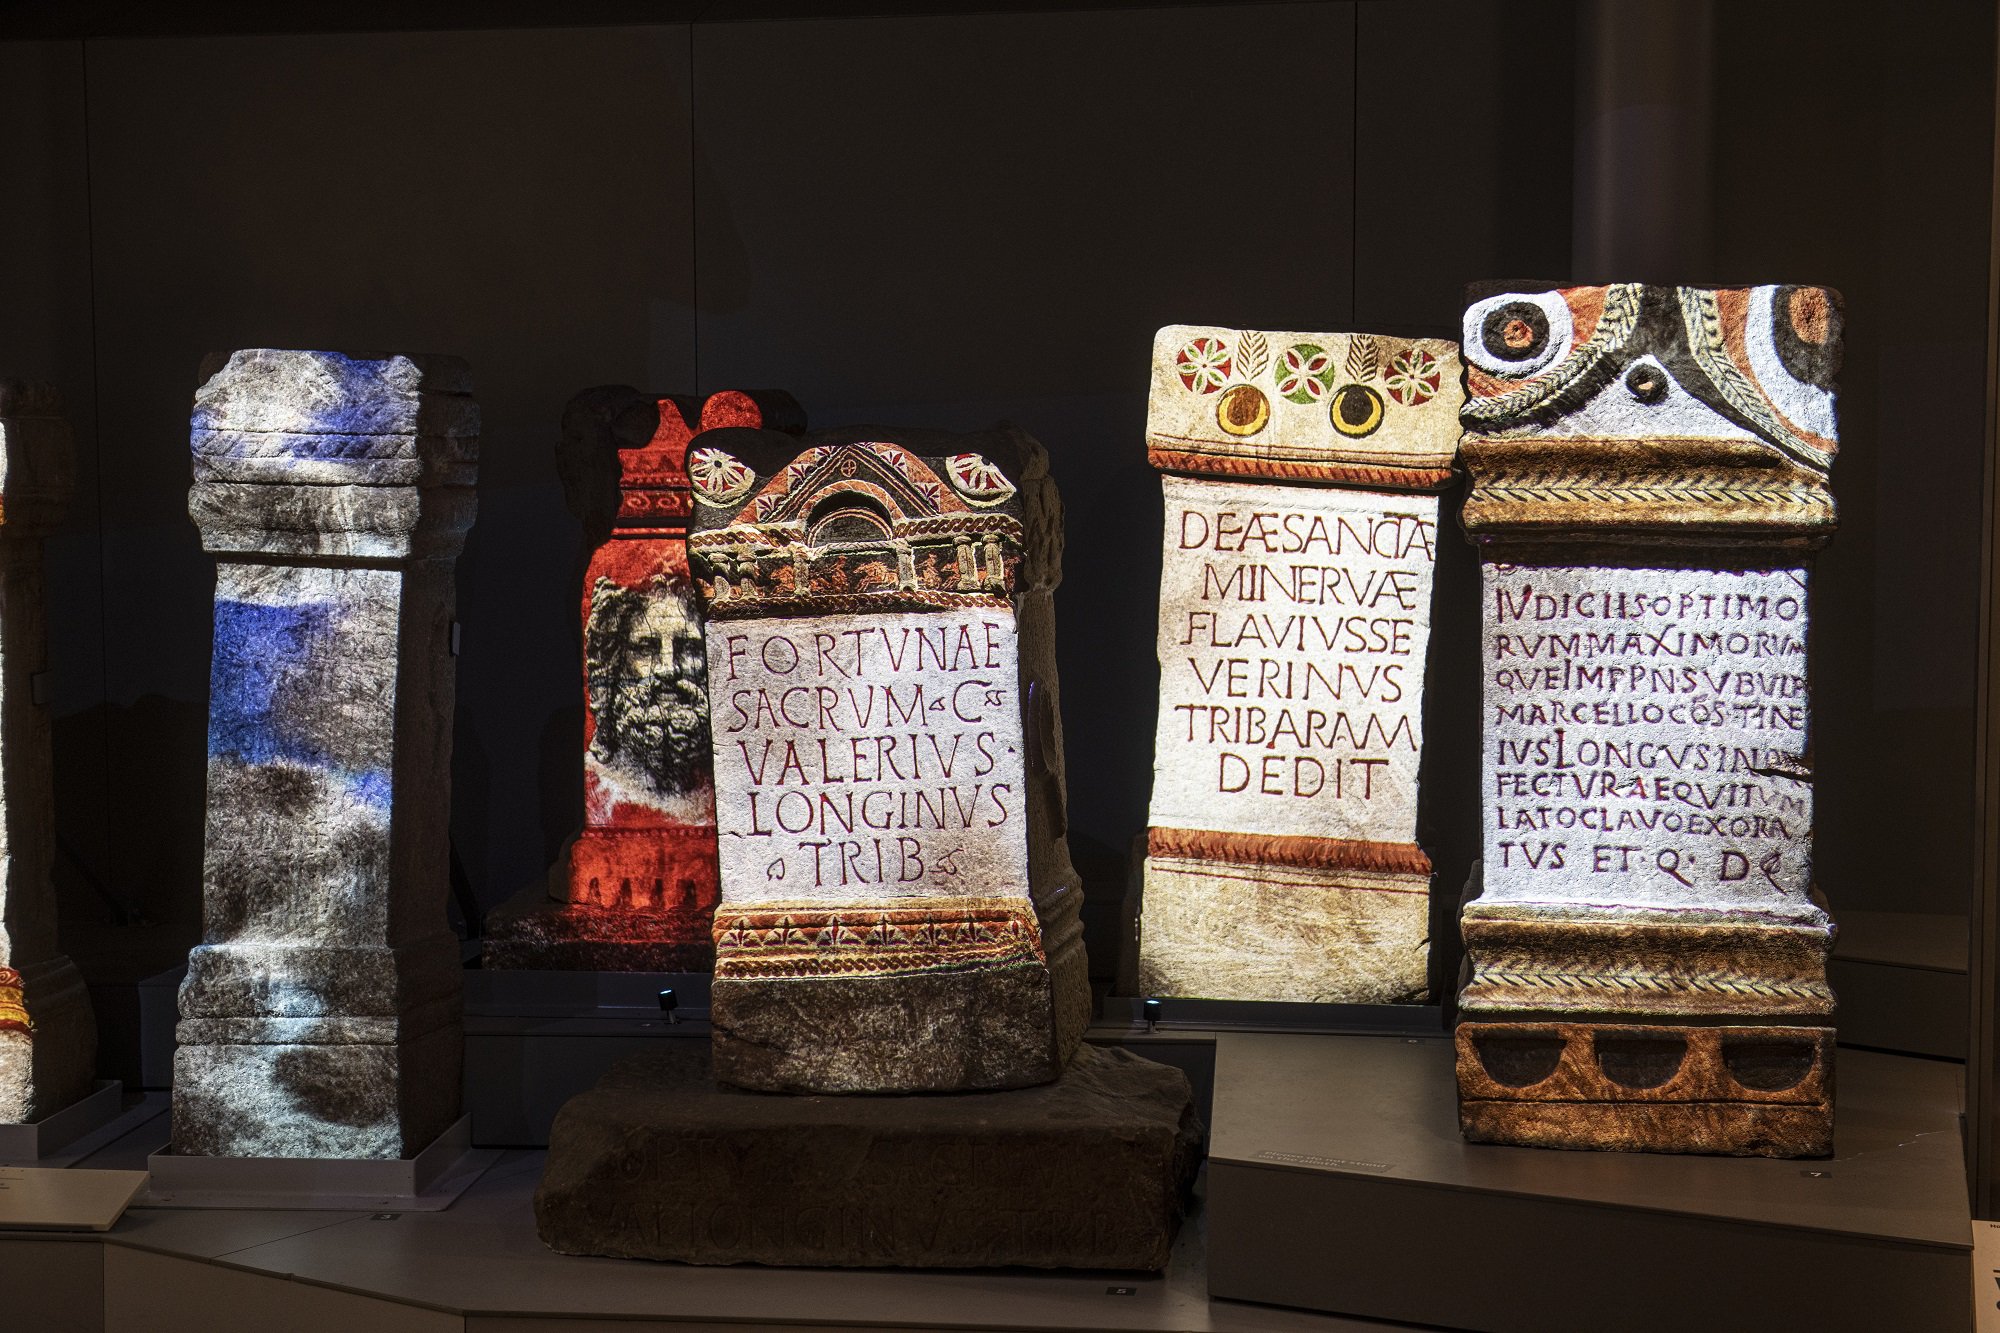 Five Roman stone altars with colourful animations projected onto them.